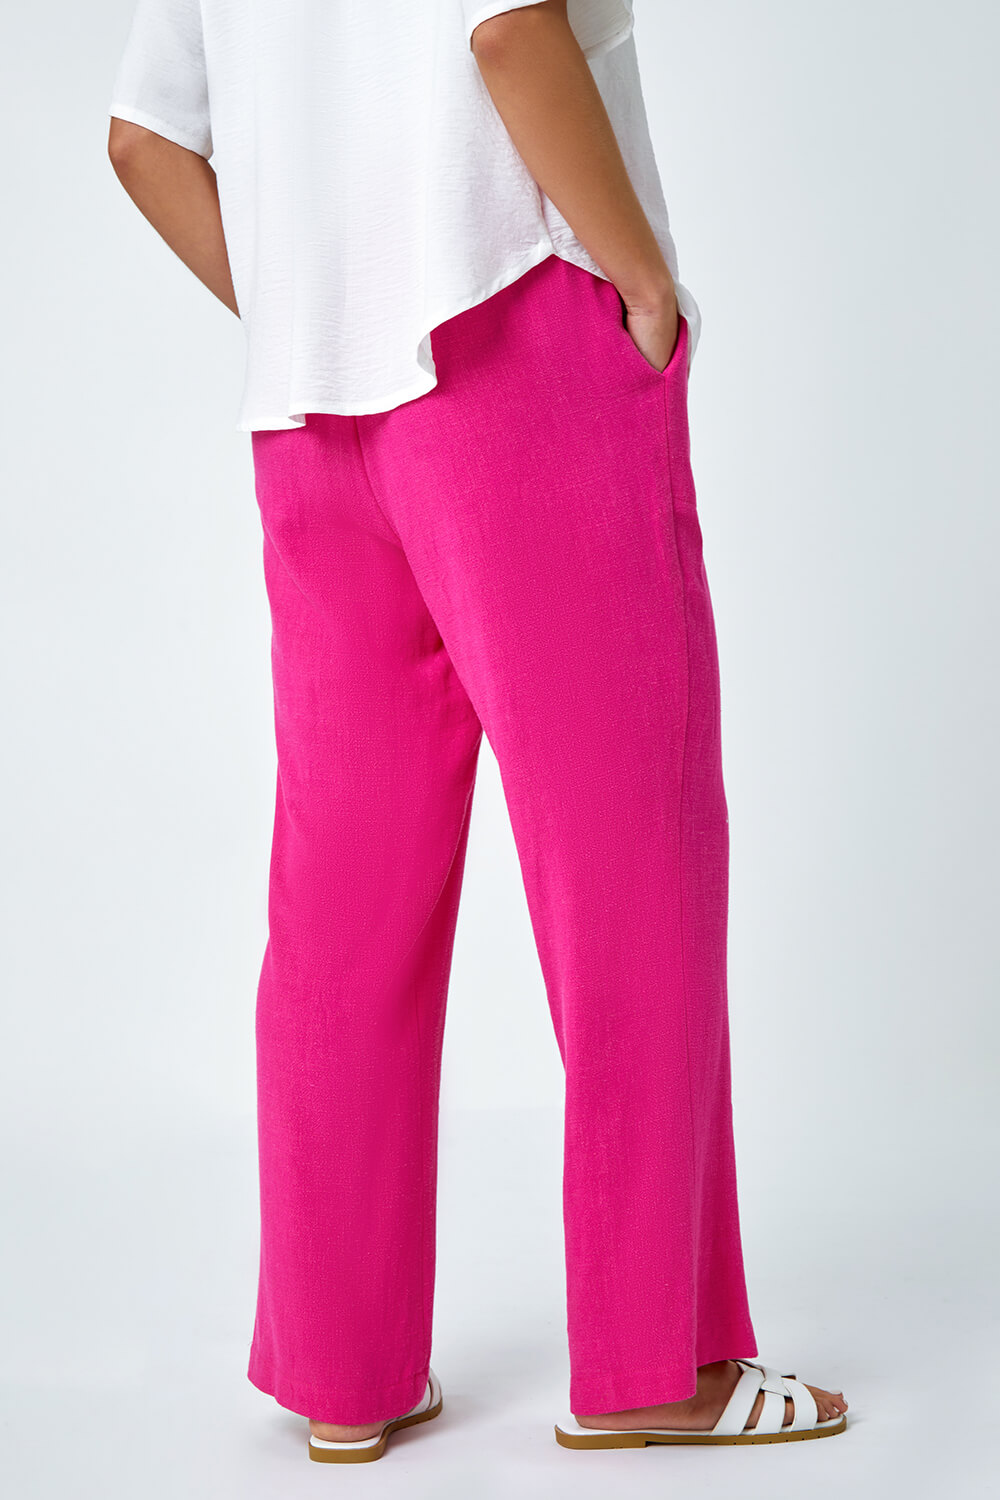 PINK Petite Linen Mix Trousers, Image 3 of 5